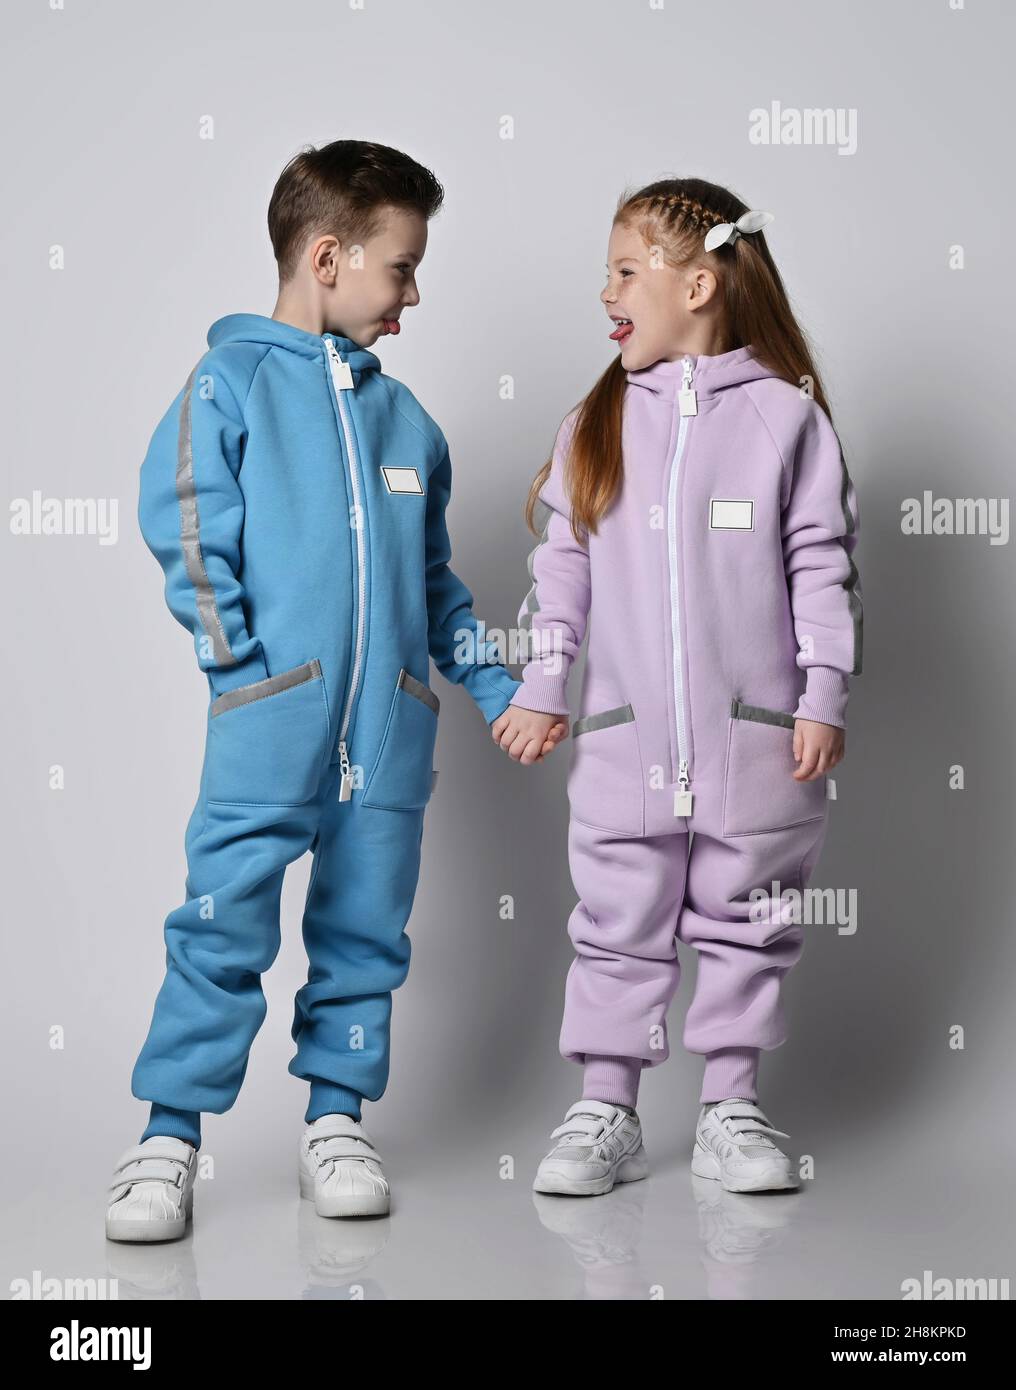 Frolic kids boy and girl, friends in blue and pink jumpsuits stand together holding hands and sticking out thier tongues Stock Photo